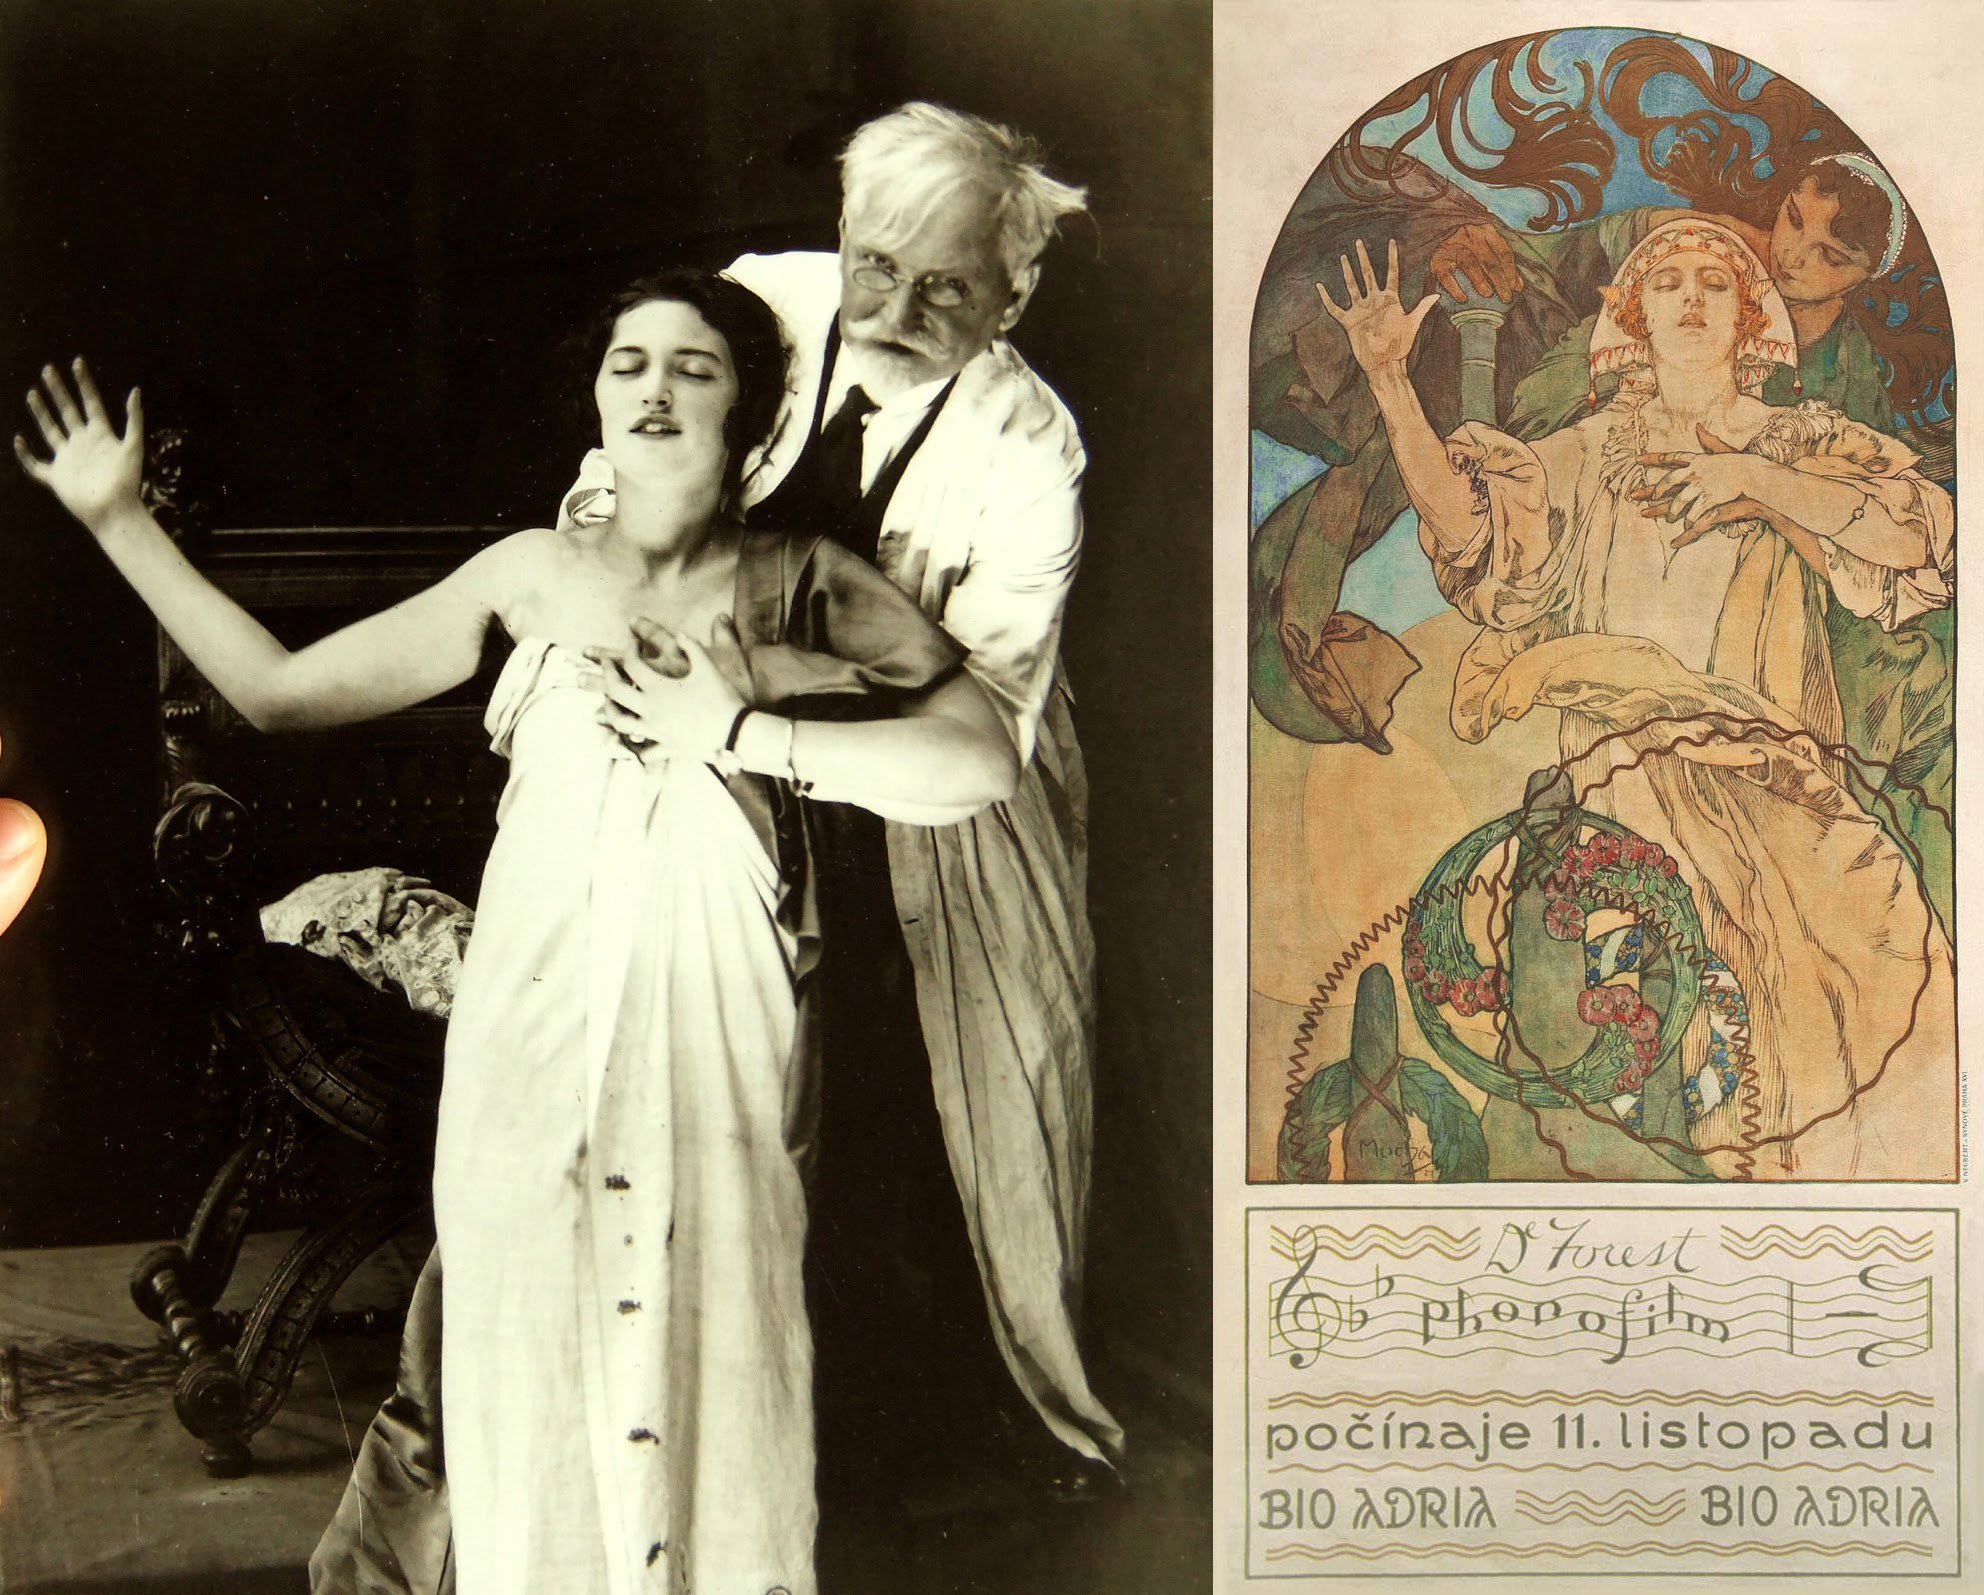 DeForest Phonofilm by Alphonse Mucha - 1927 collection privée